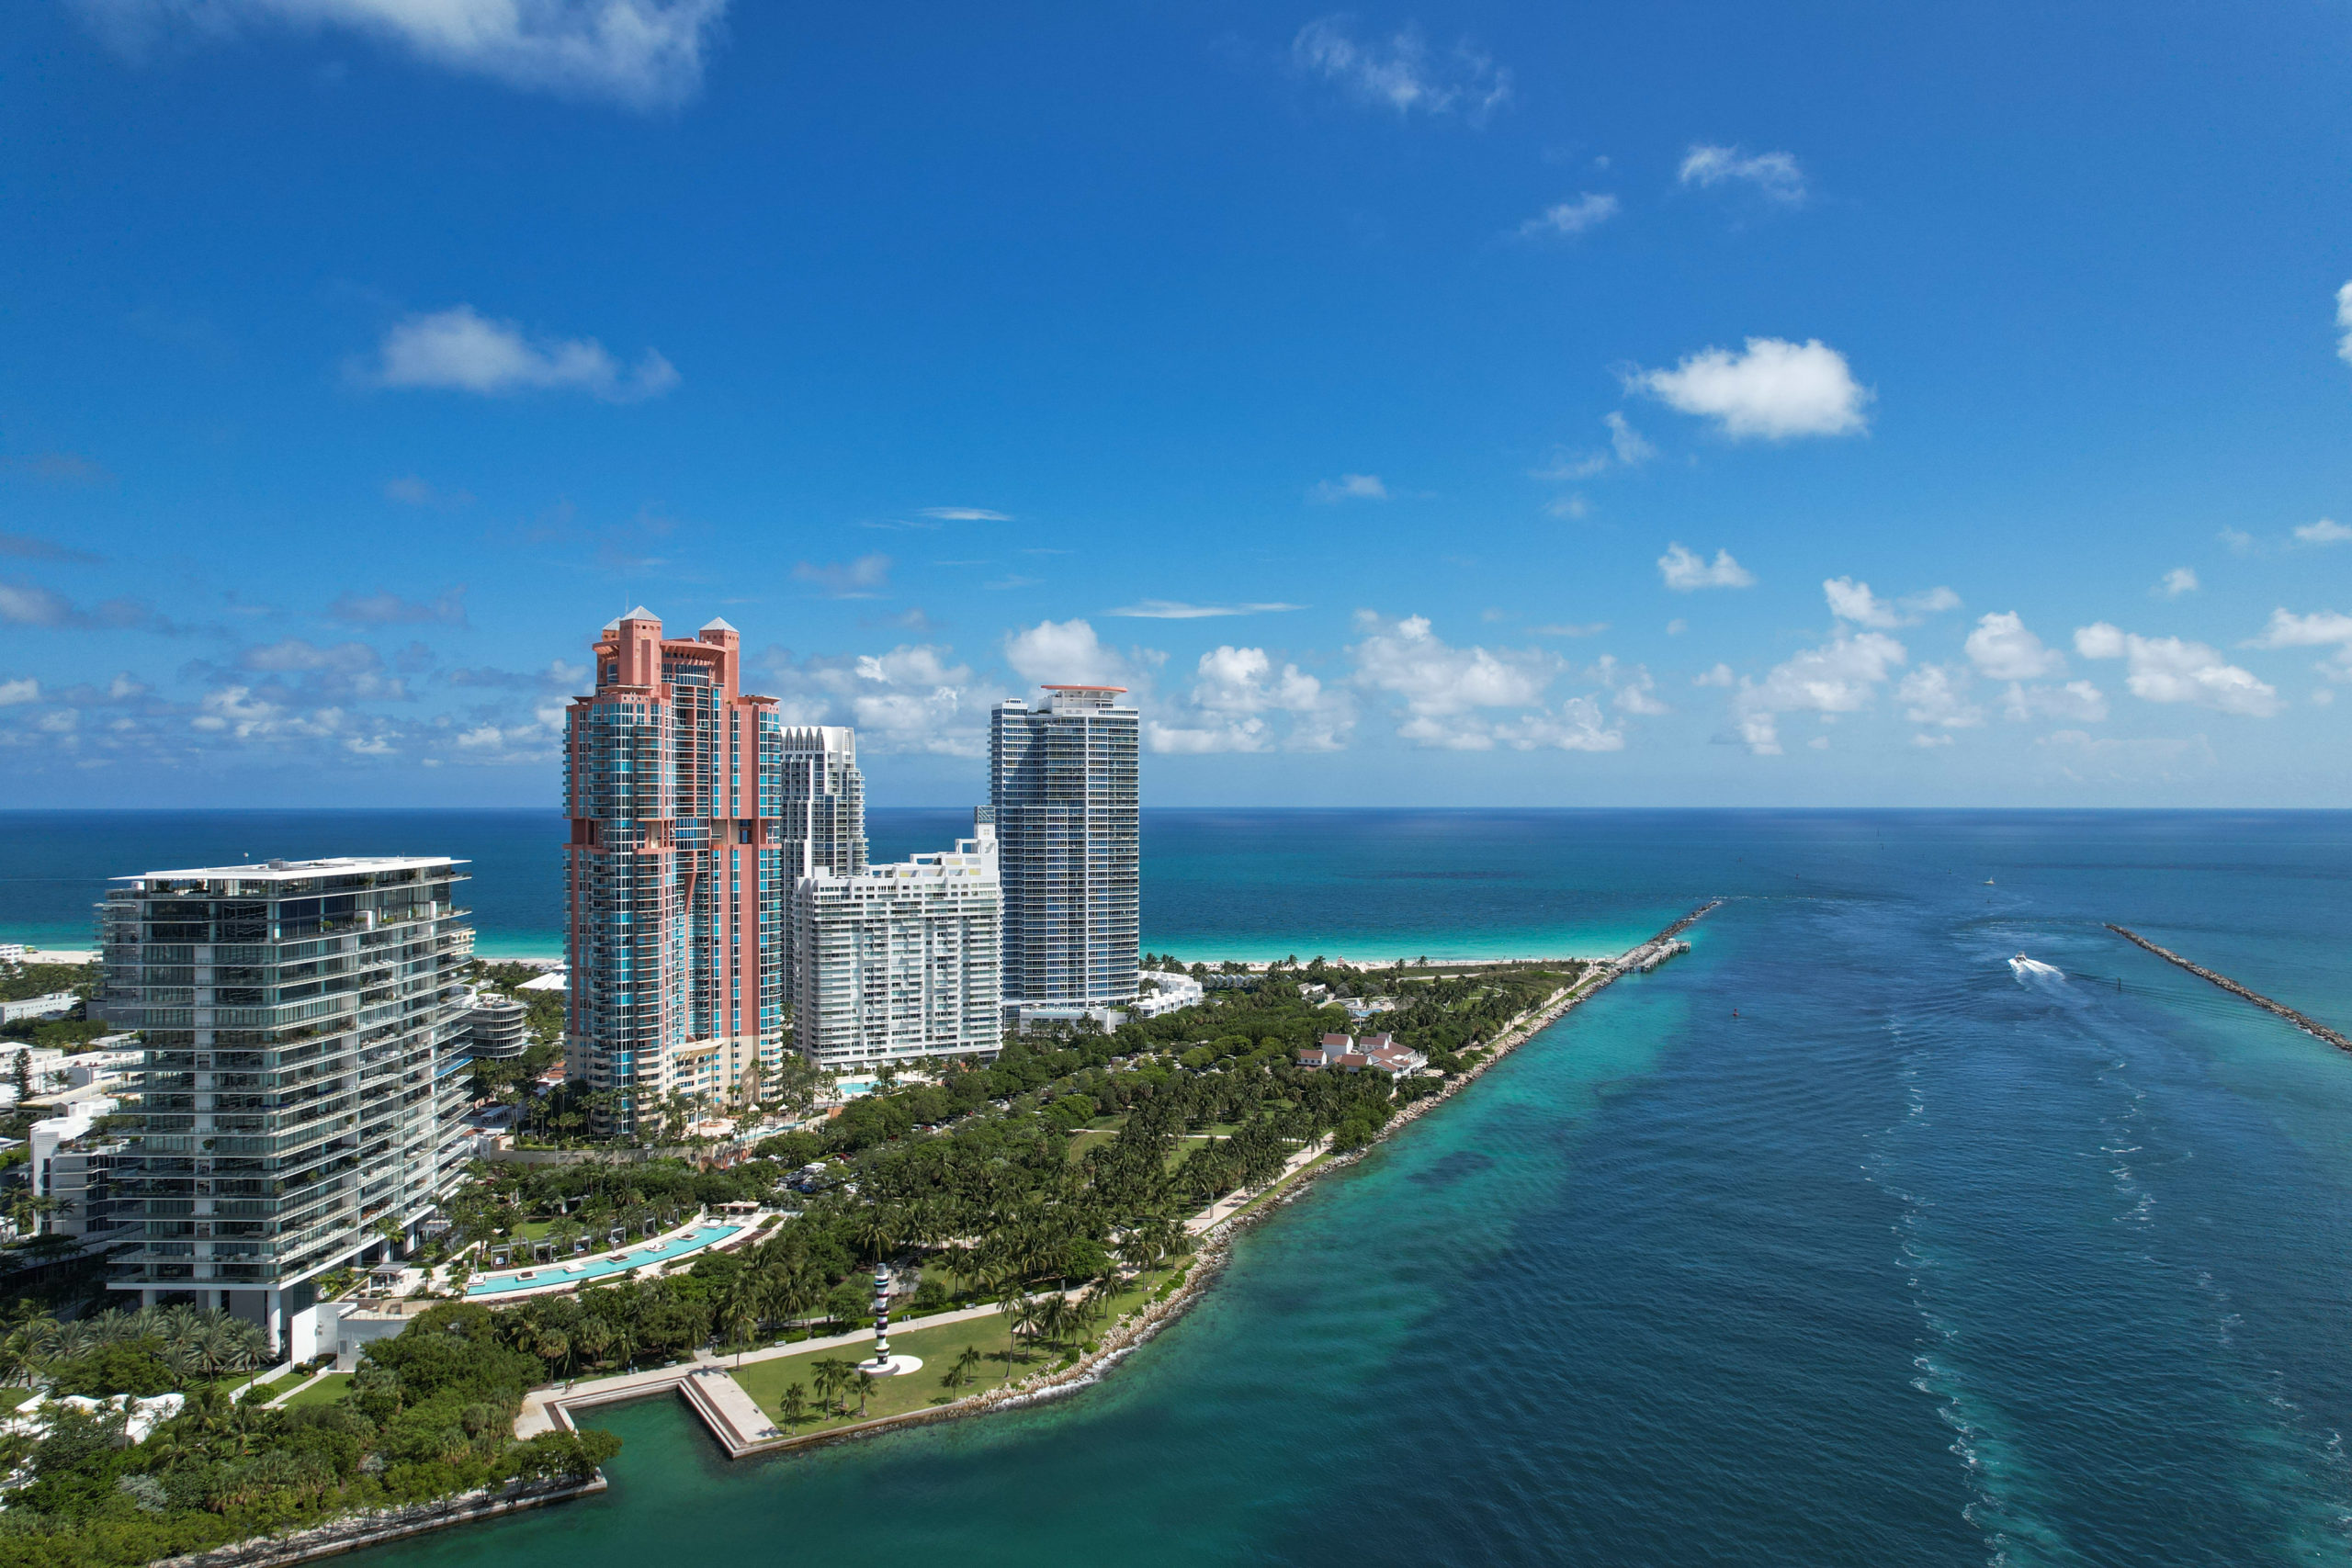 Continuum South Beach Condos for Sale | What are the 5 Best Values At the Moment